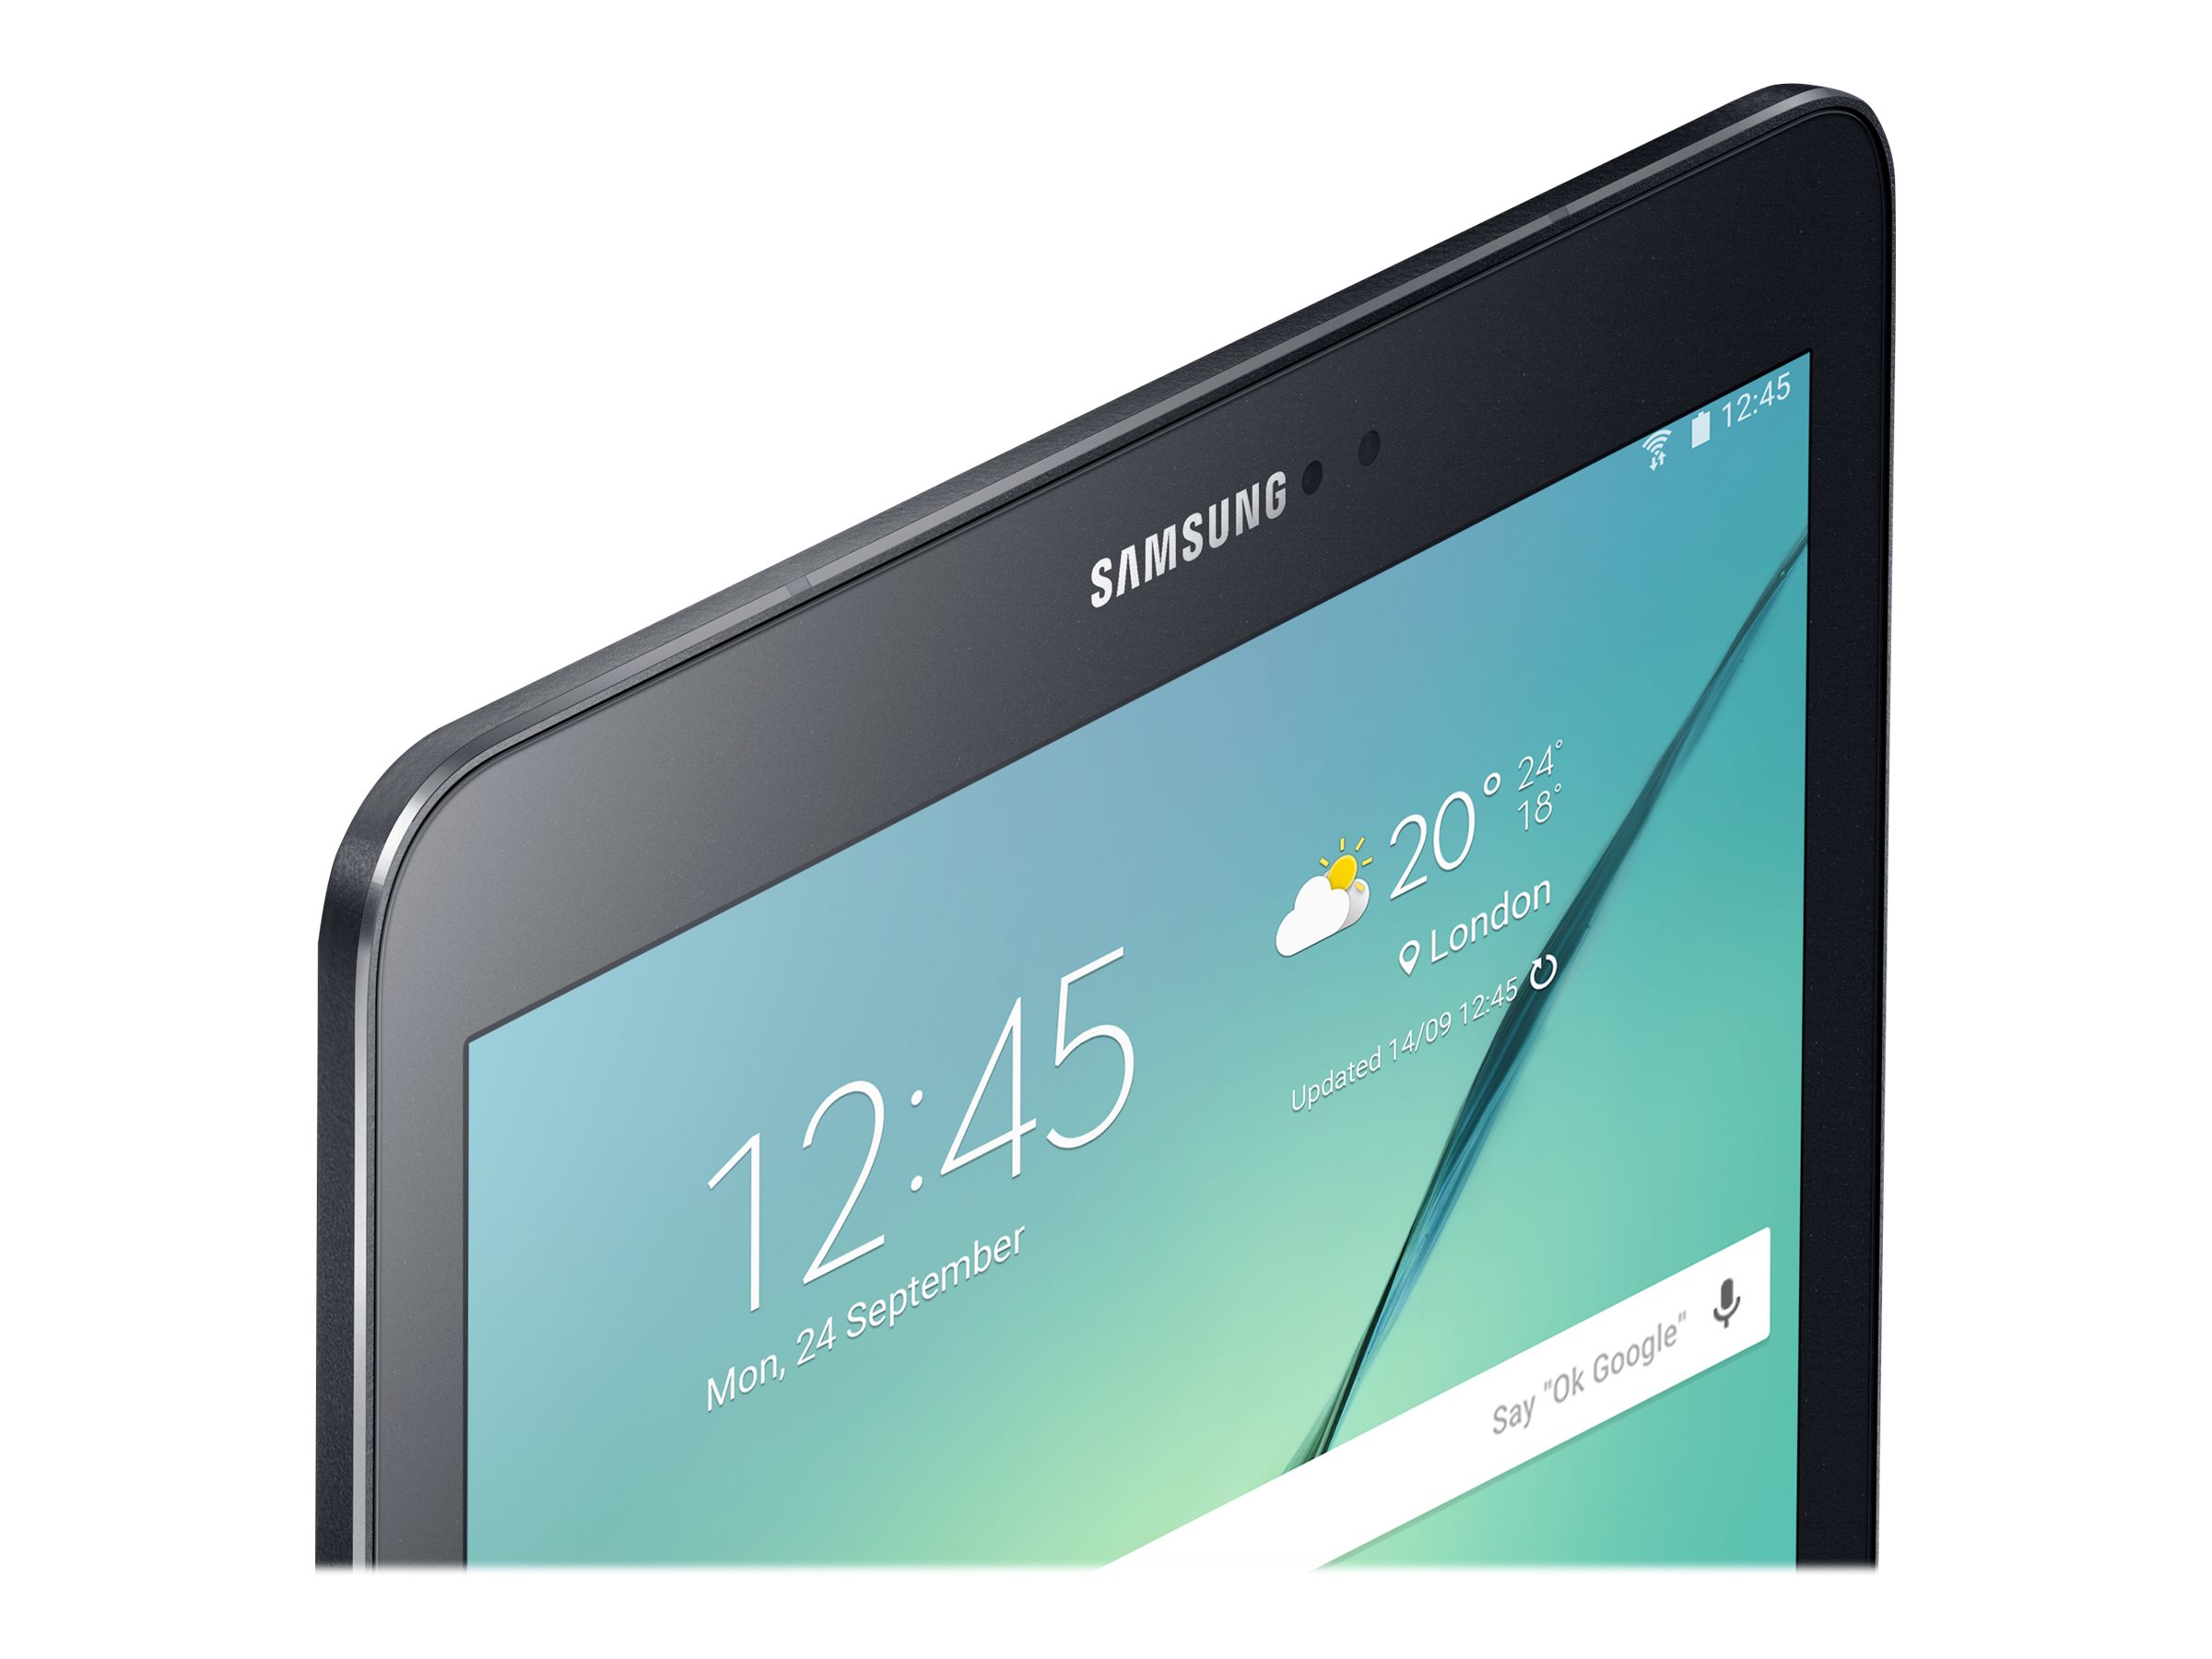 SAMSUNG Galaxy Tab S2 9.7" 64GB Android 6.0 WiFi Tablet Black - Micro SD Card slot - SM-T813NZKFXAR - image 4 of 12